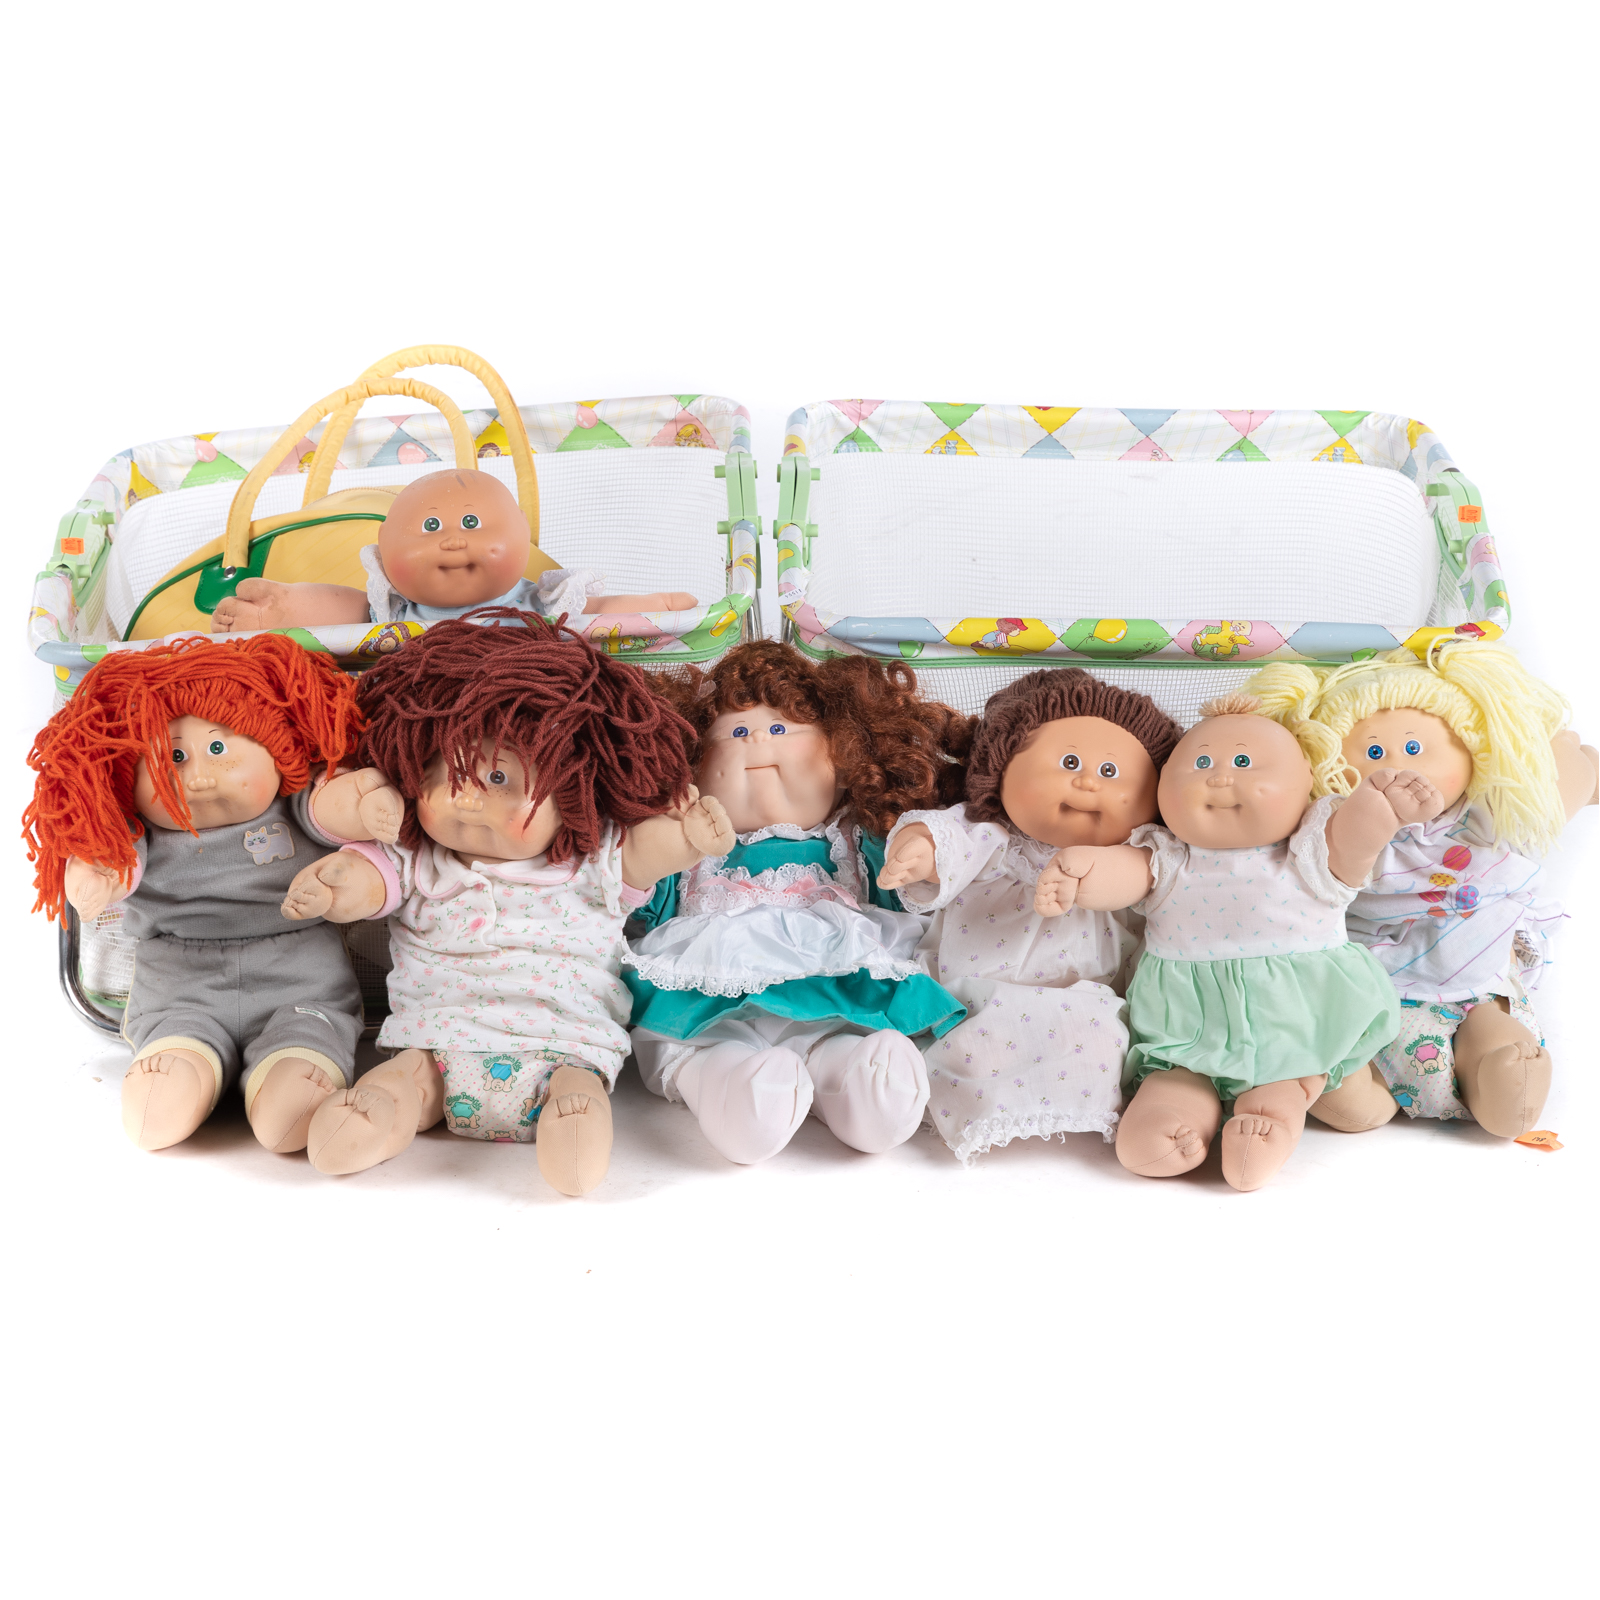 SEVEN CABBAGE PATCH KIDS ACCESSORIES 36a1a8